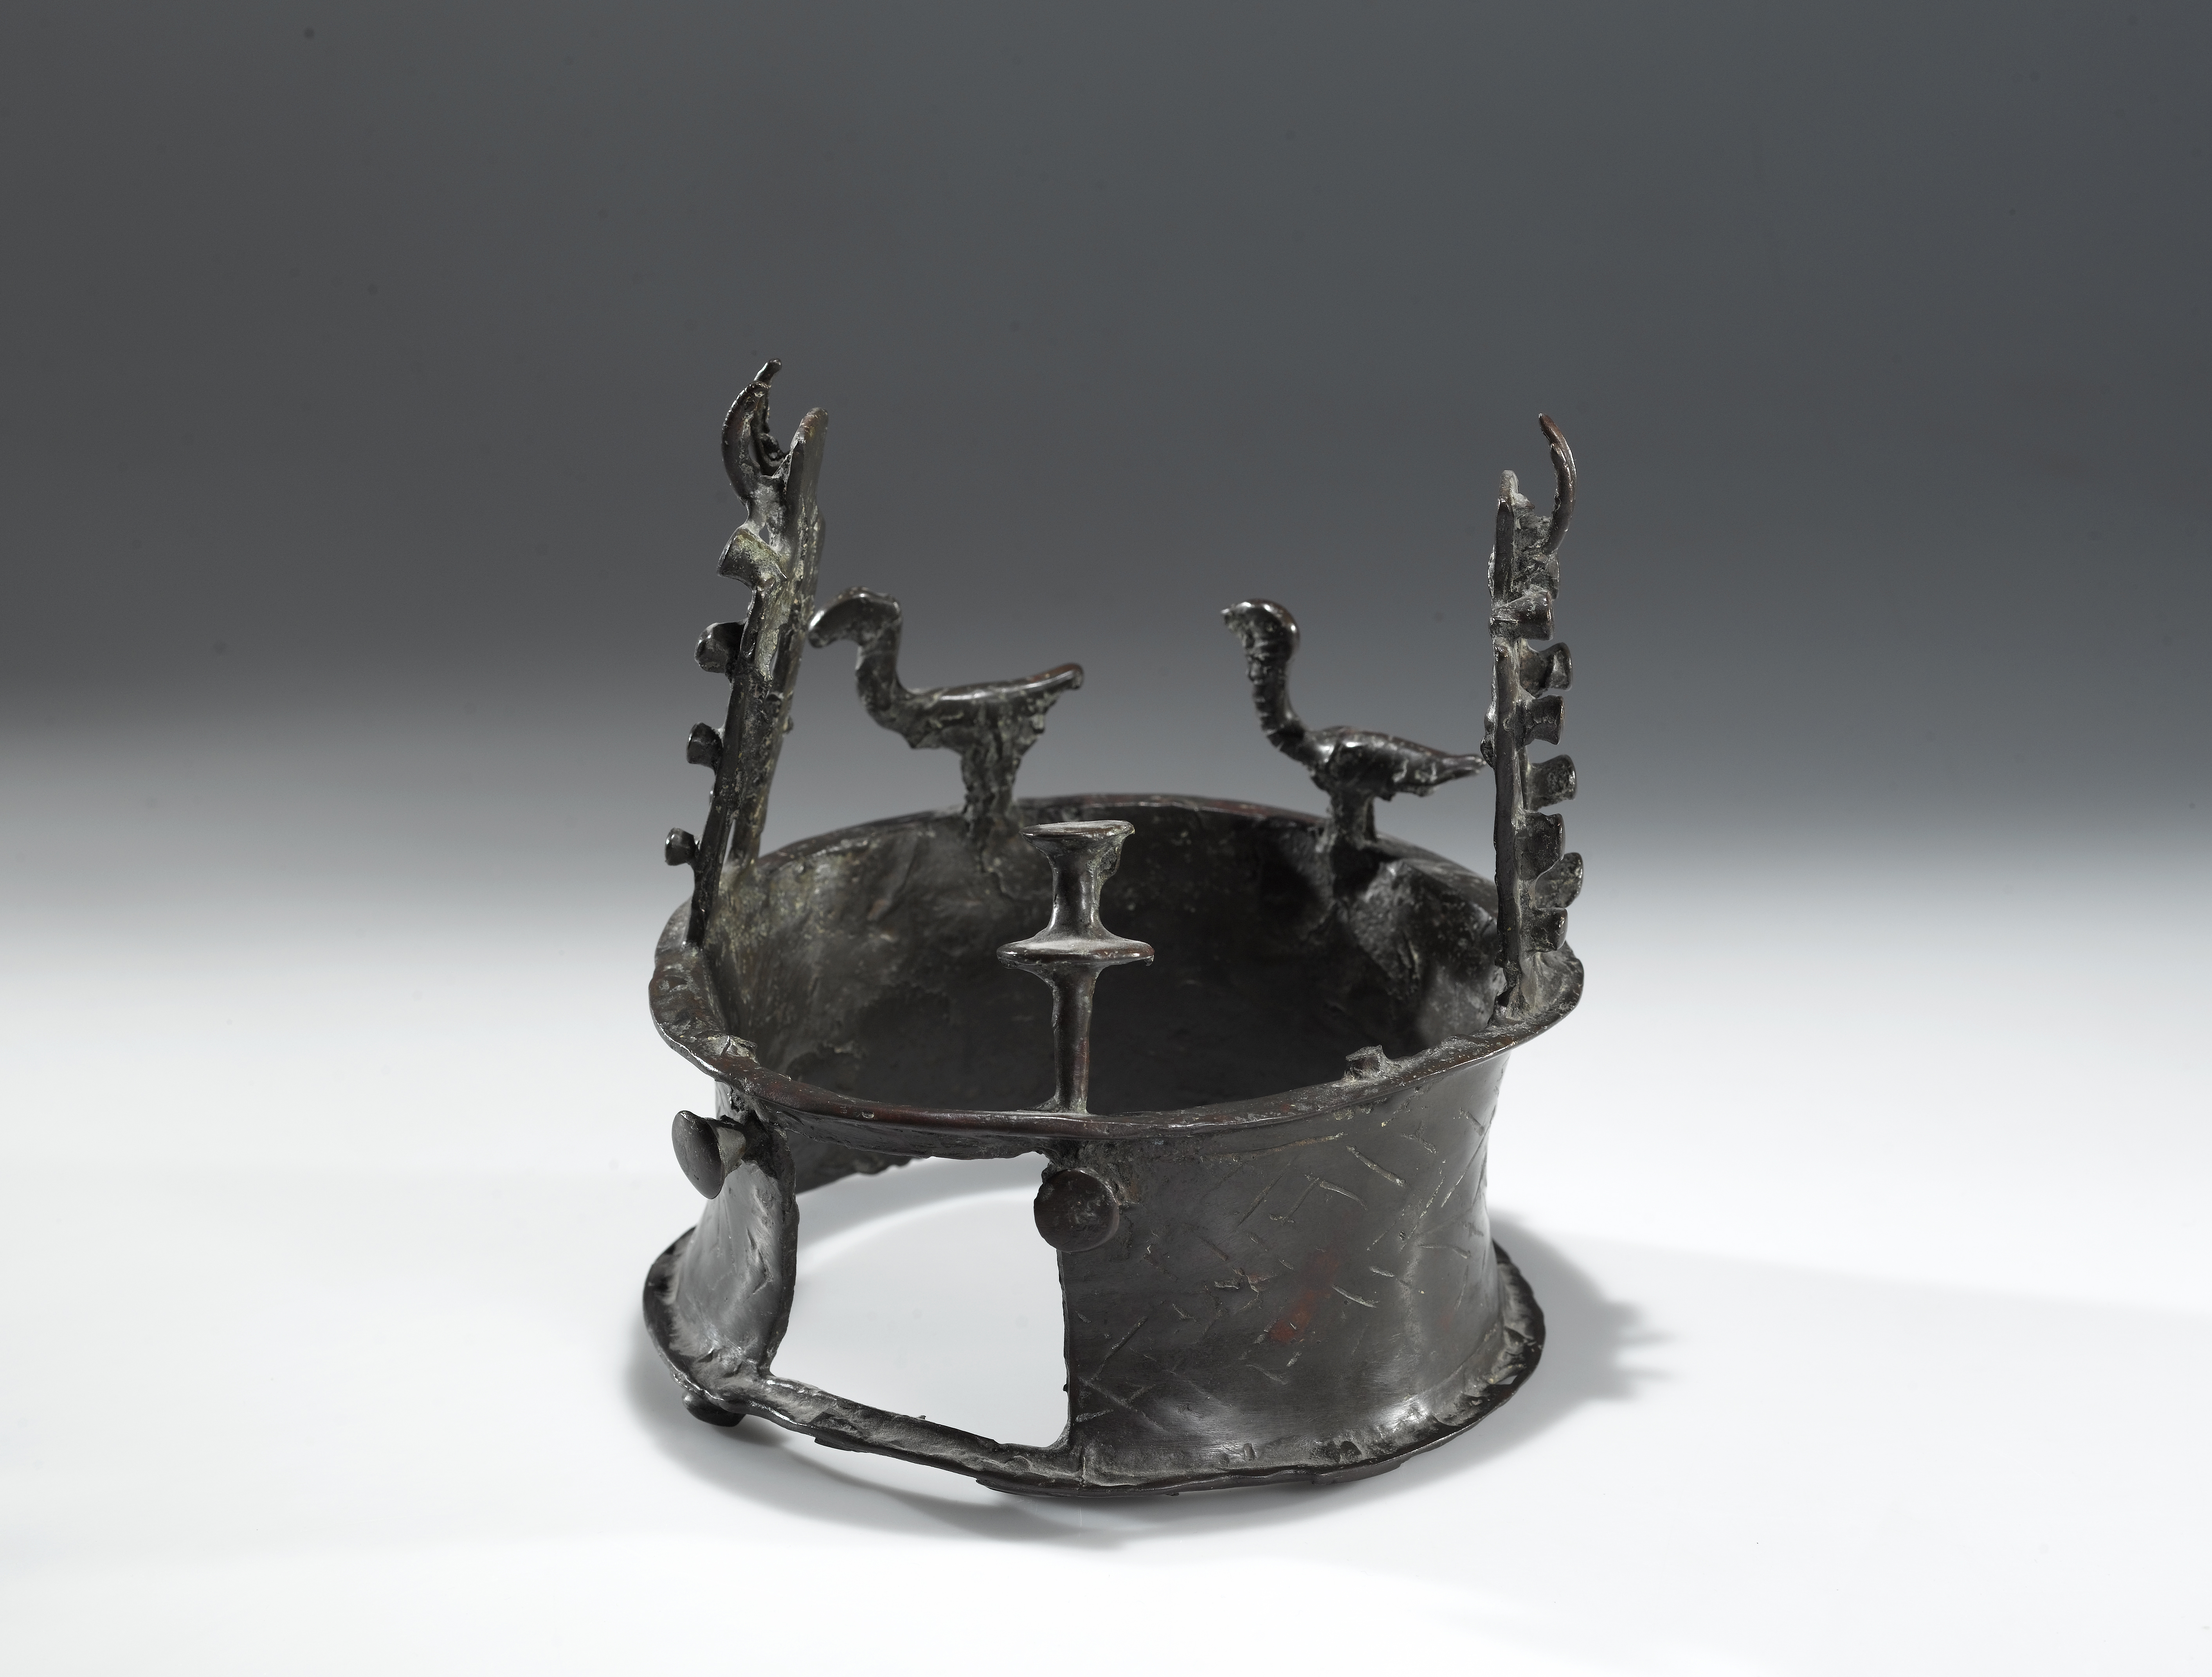 Copper crown with Building-Façade Decoration and Vultures, 4500–3600 BCE